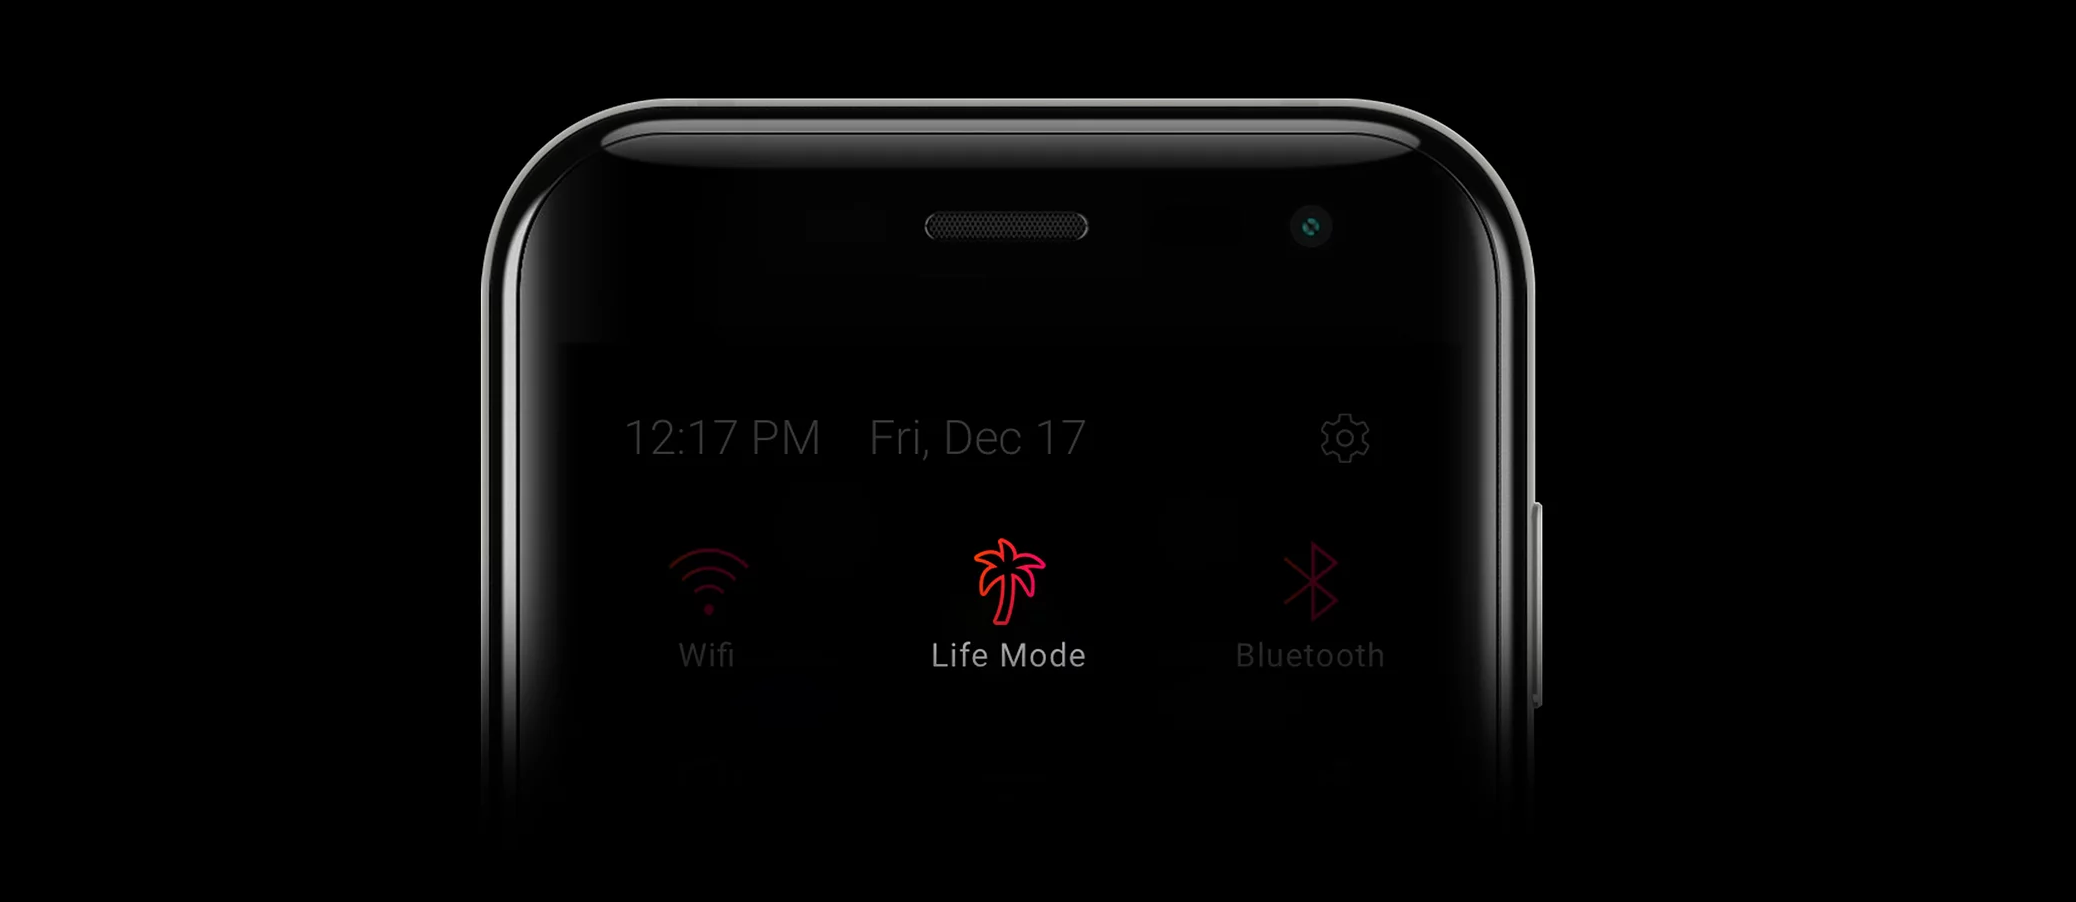 Life Mode on Palm best small smartphone